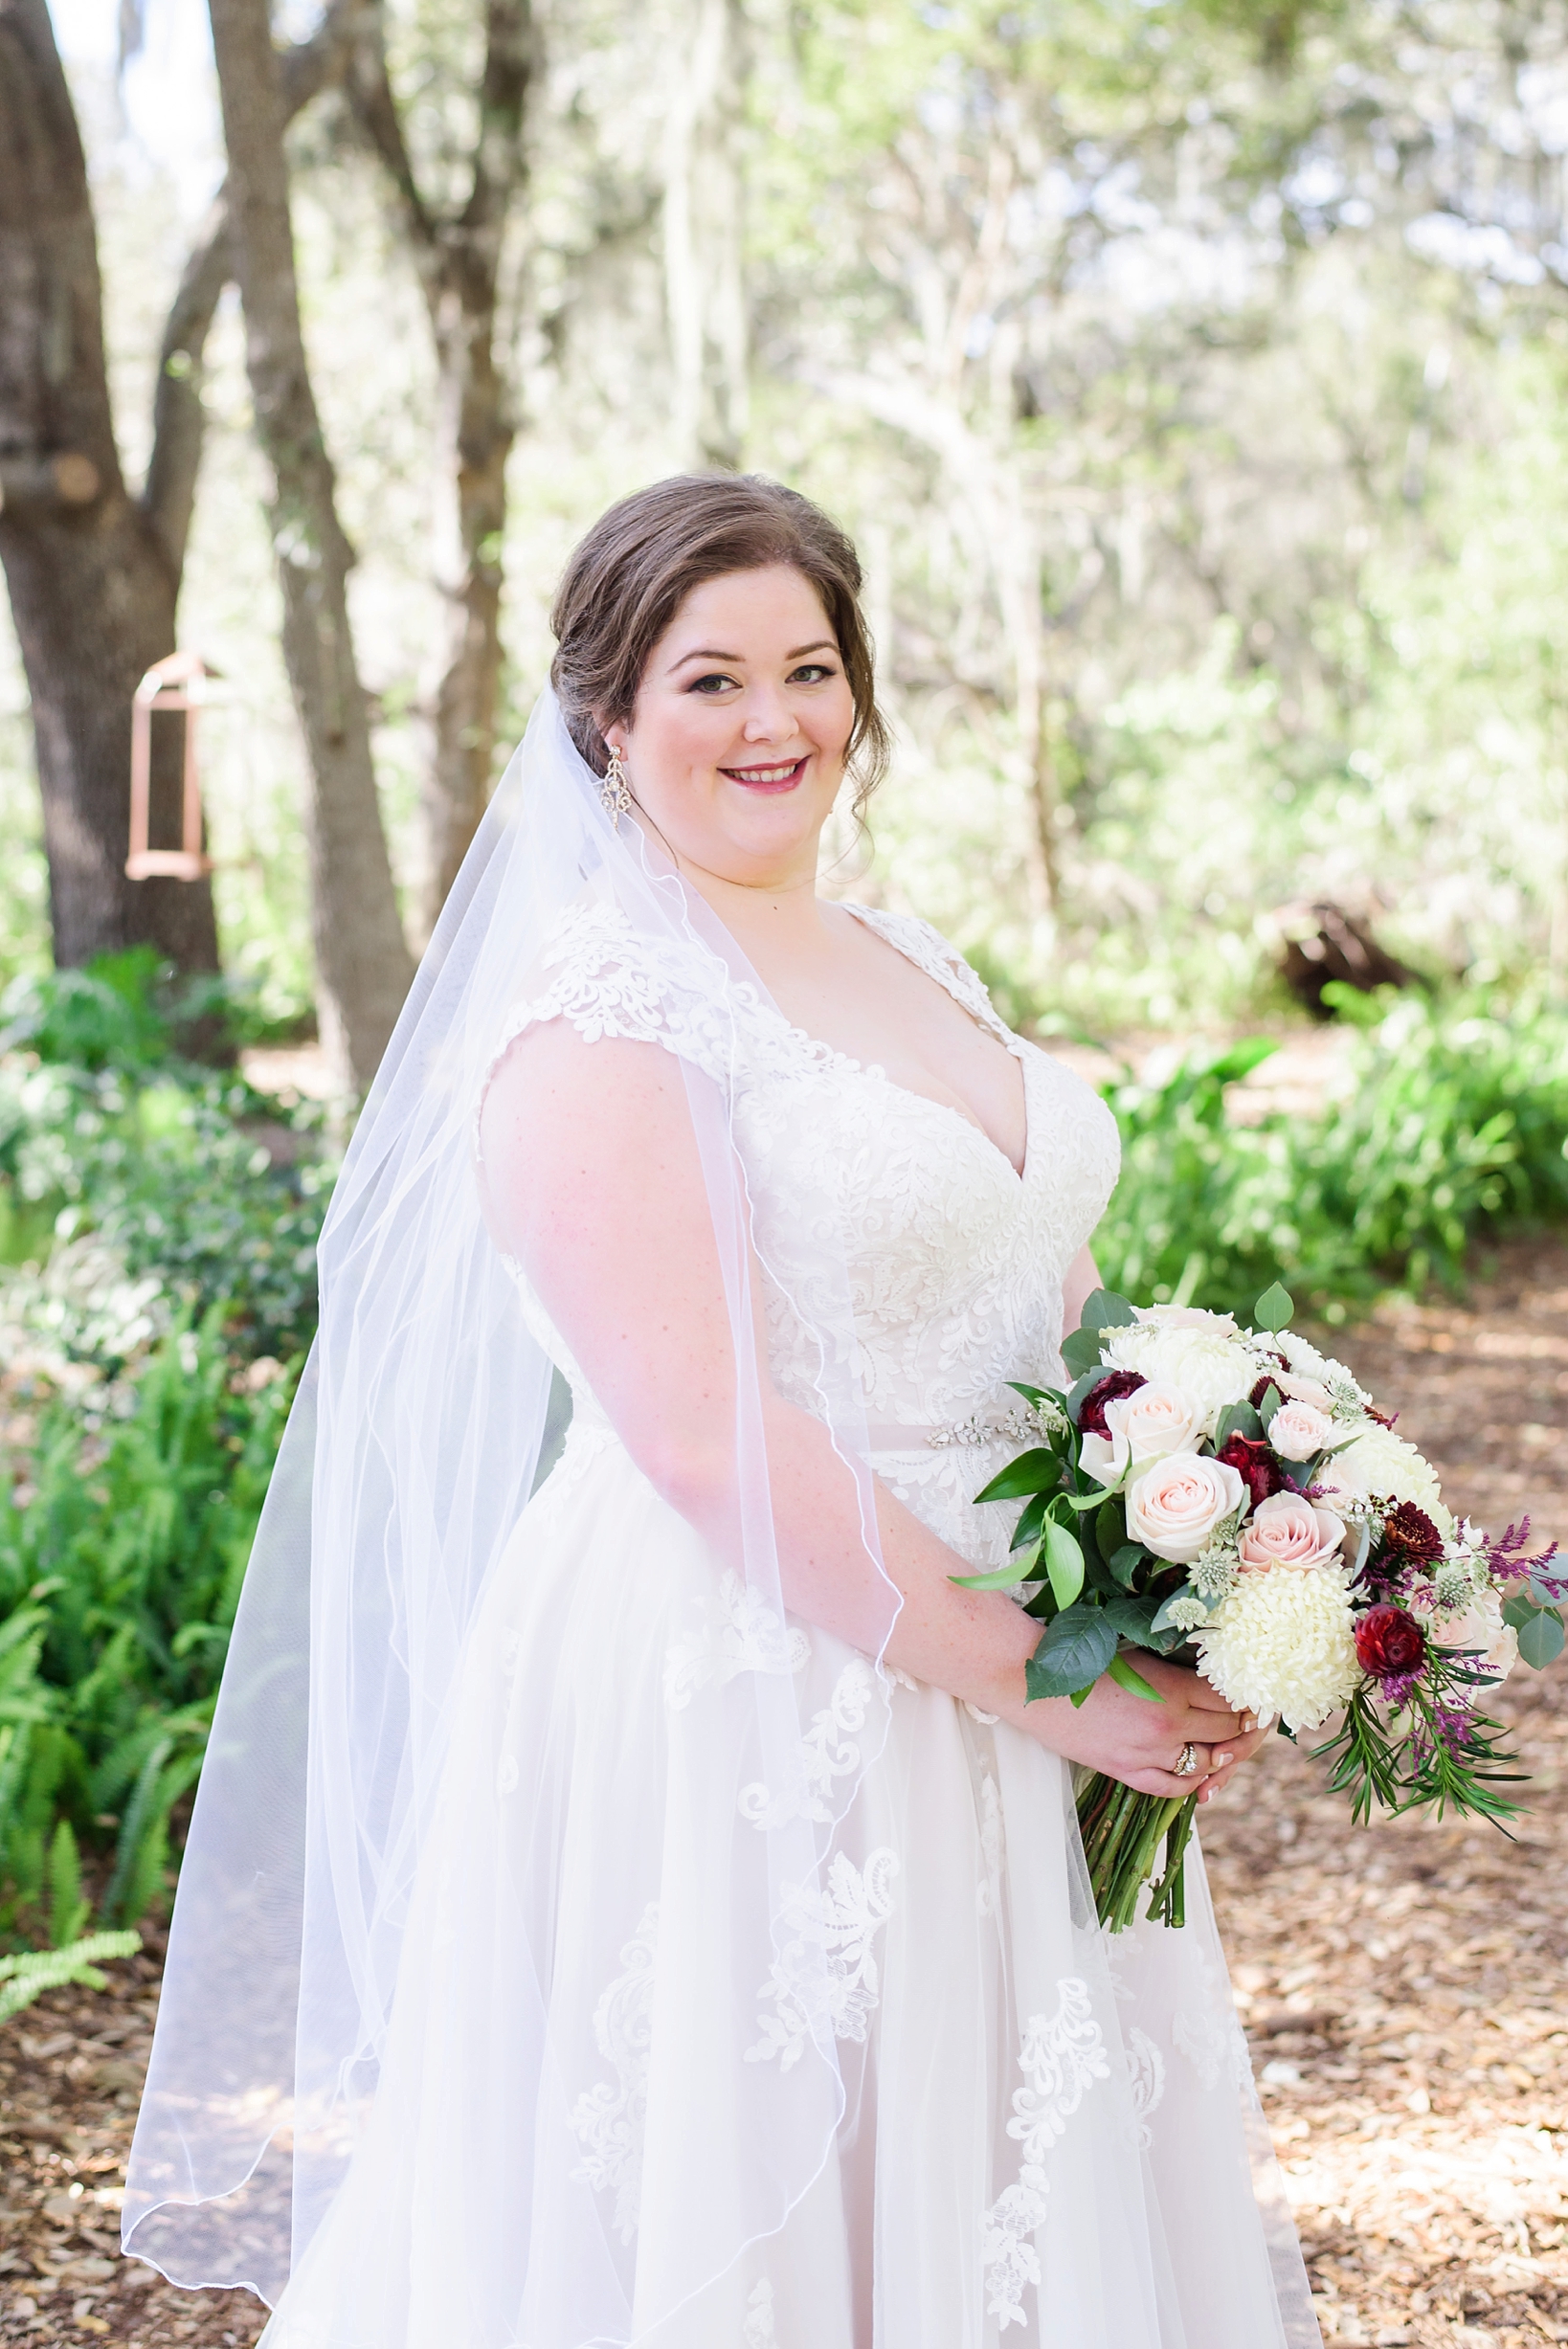 Bride holding her bouquet surrounded by natural light pouring in through the forest